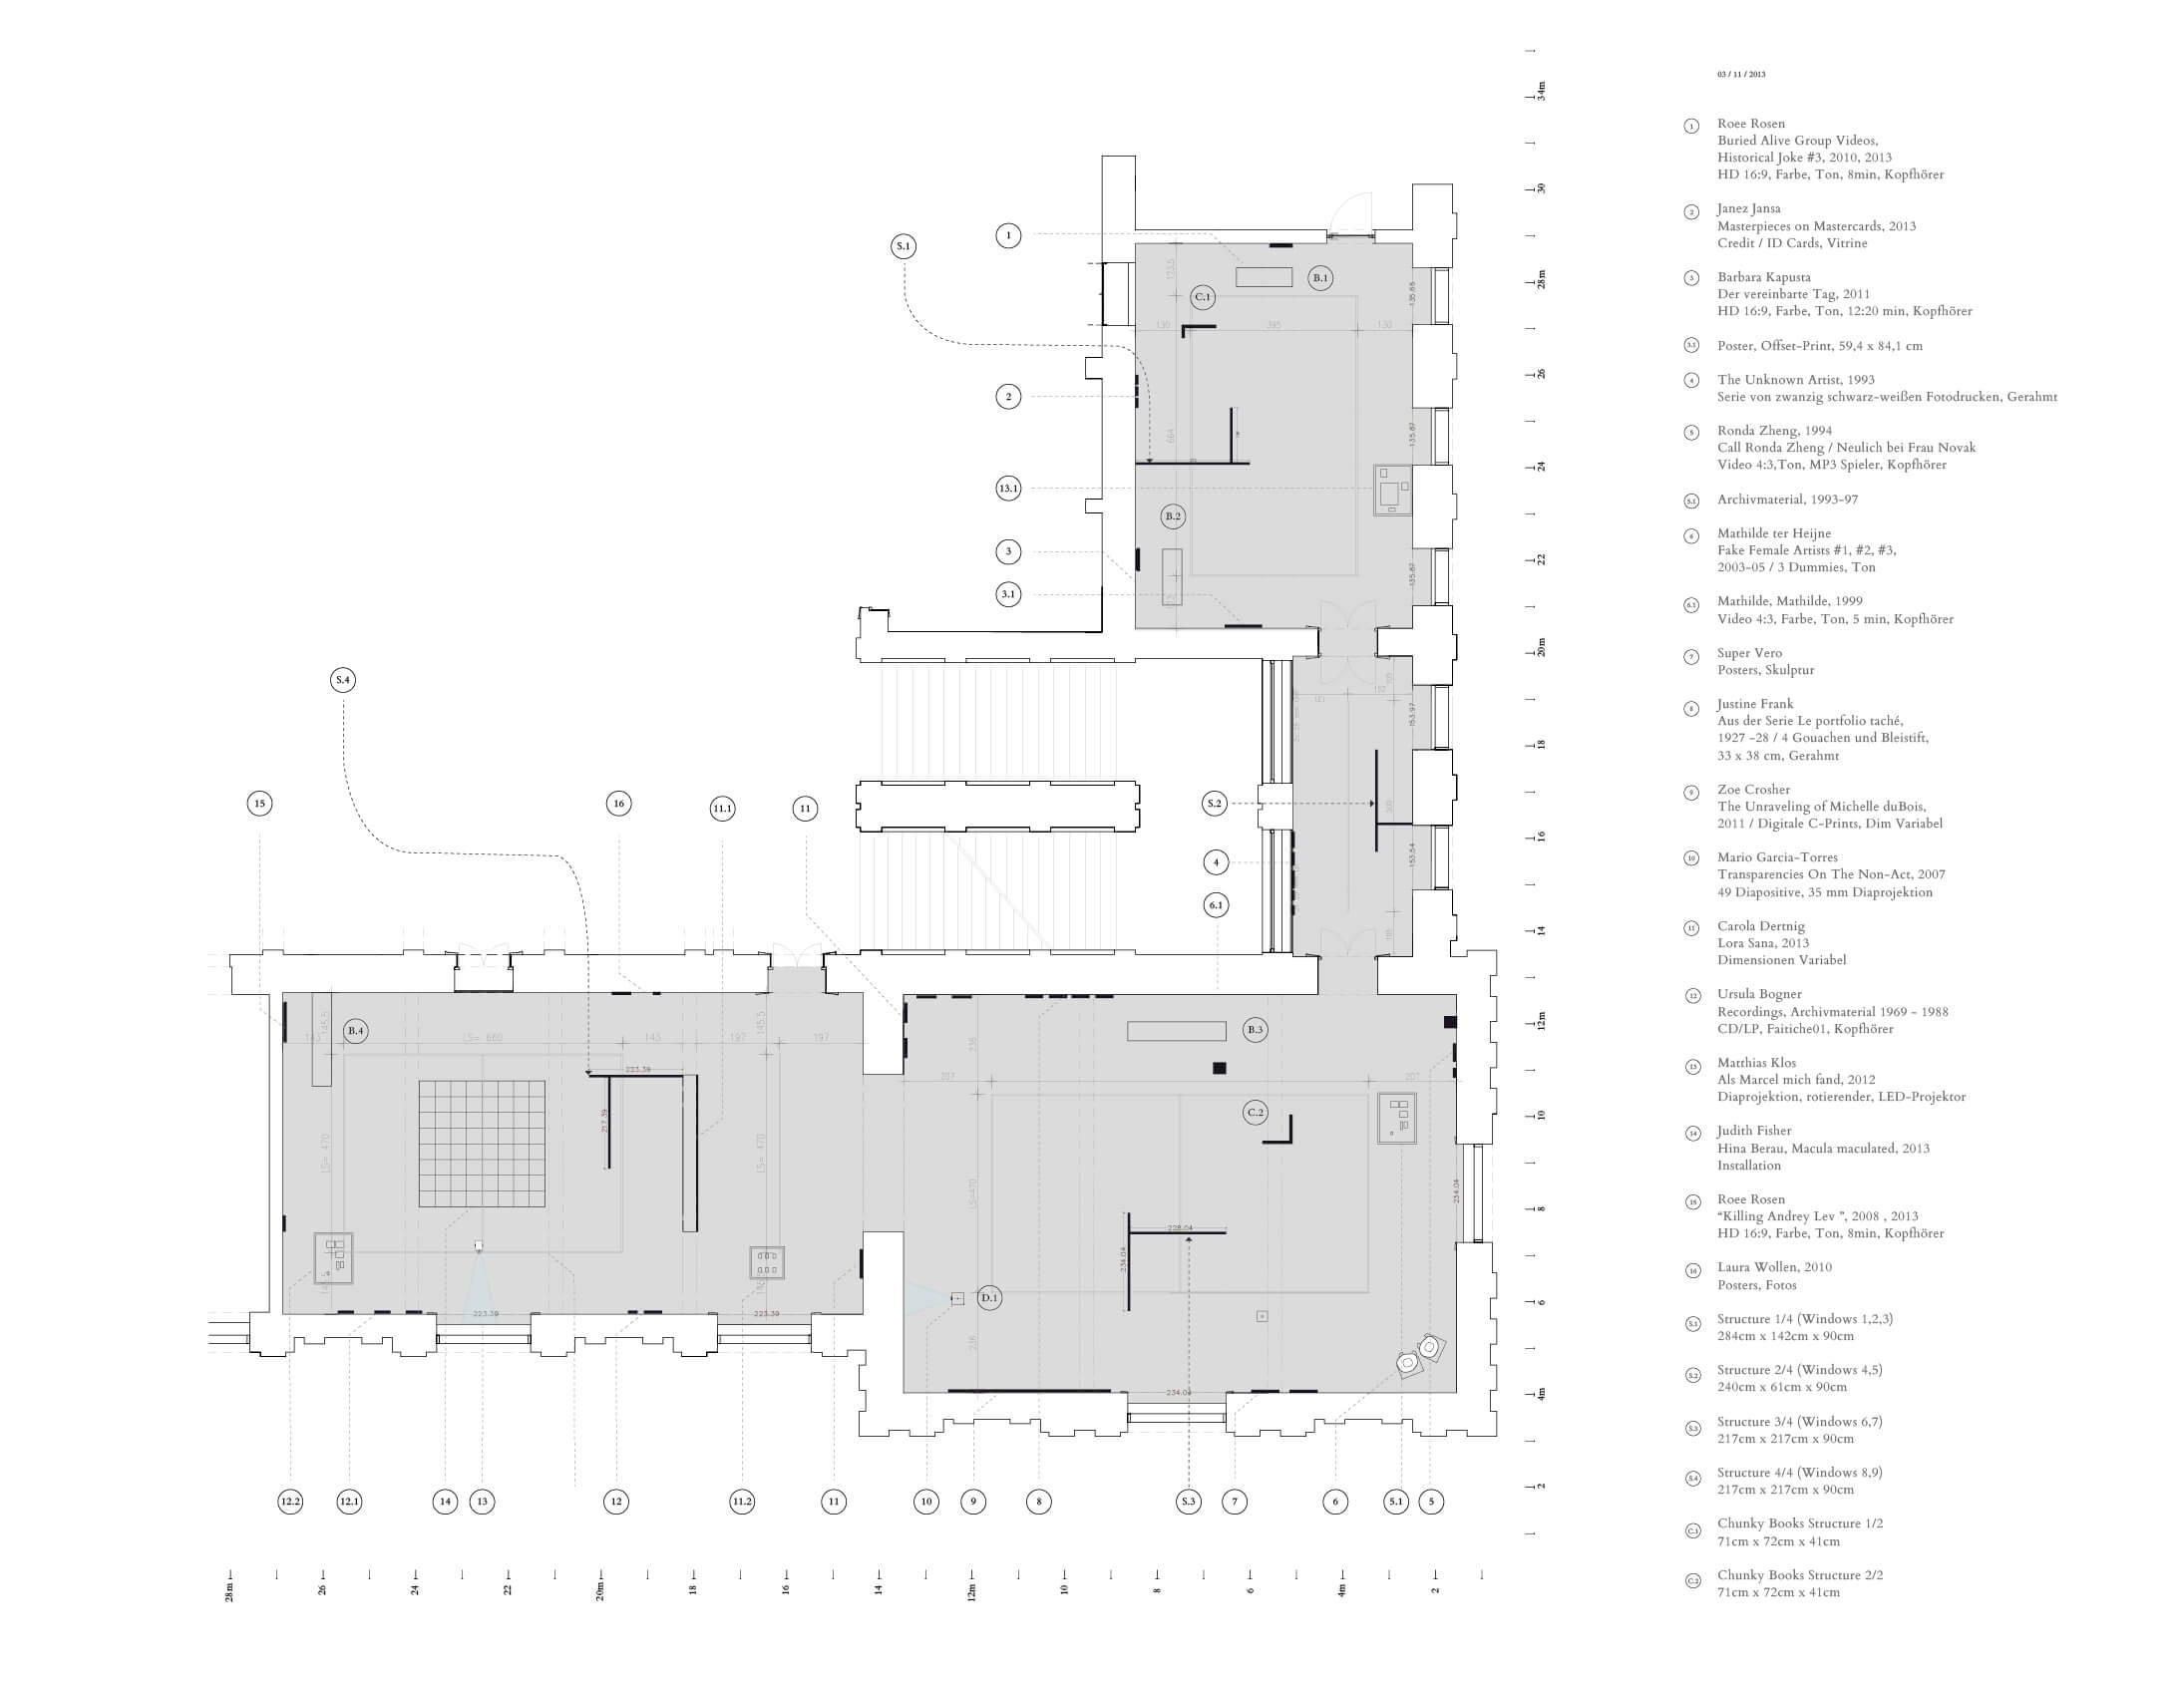 Exhibition Spatial Layout / Plan Drawing 